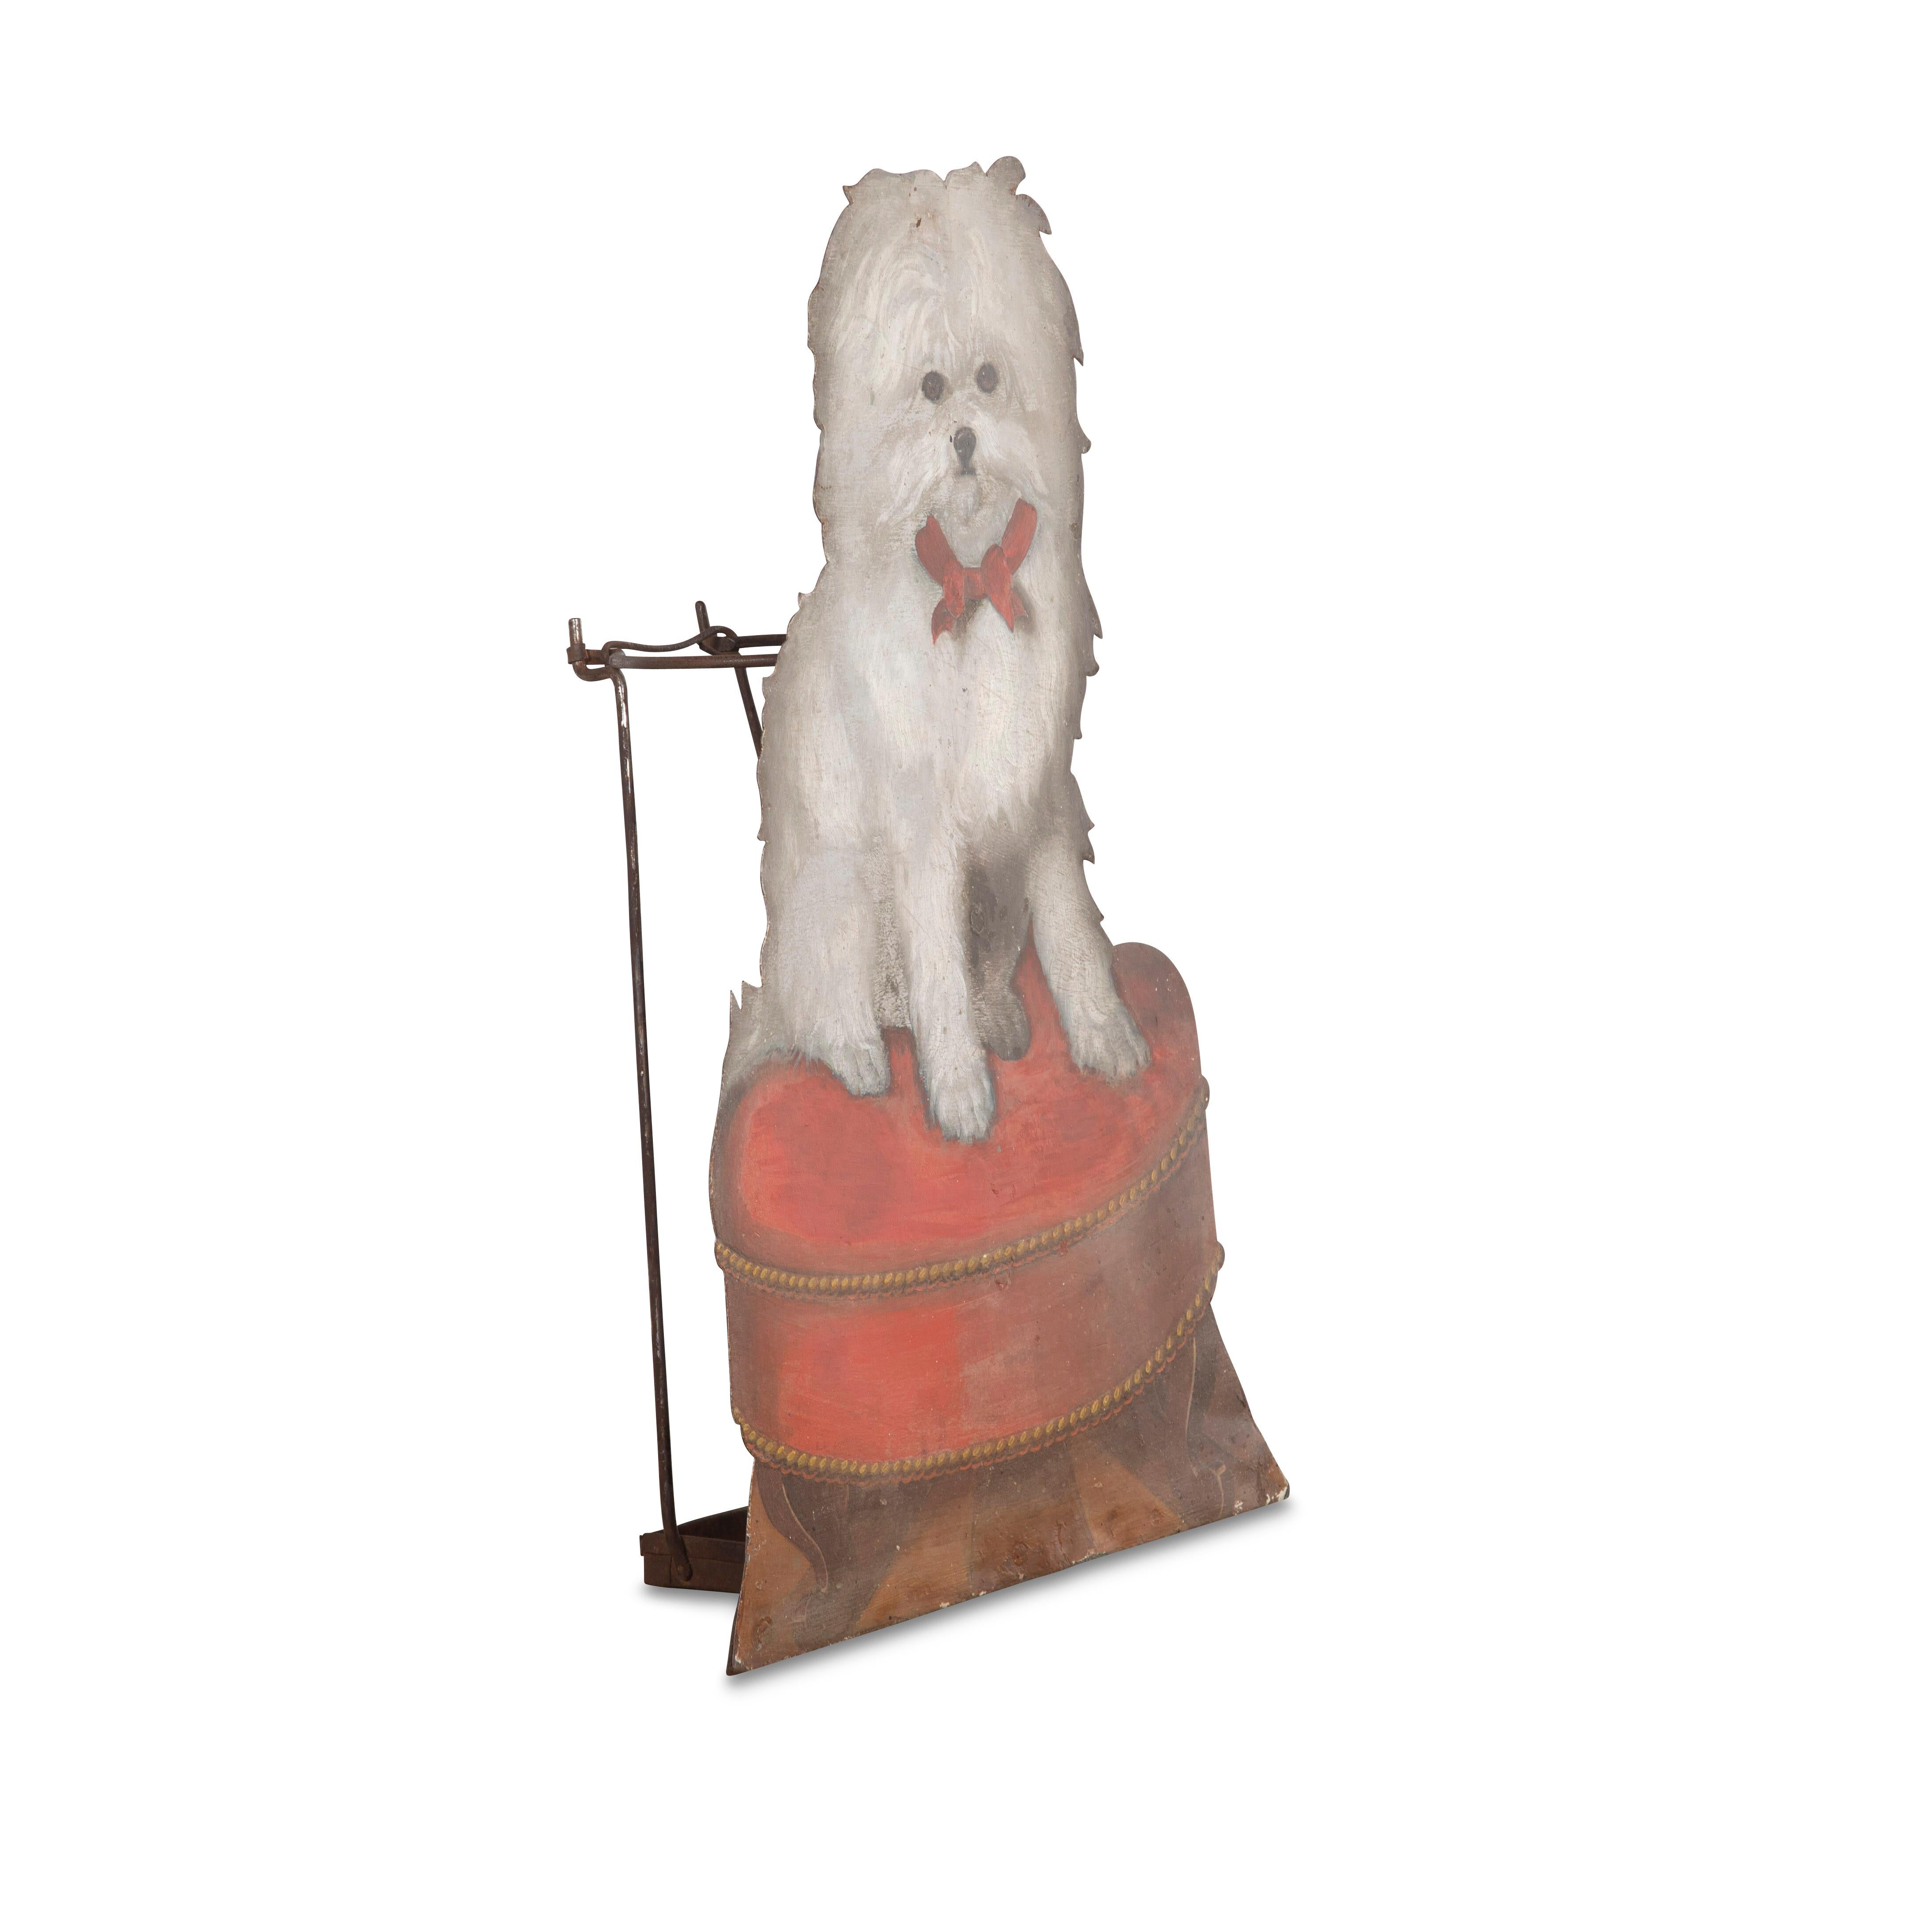 A rare C19th decorated tole dummy board constructed as stick stand, depicting a terrier with red ribbon collar, seated upon a red velvet cushion stool with small cabriole legs and parquetry floor below. A visually charming article of what was